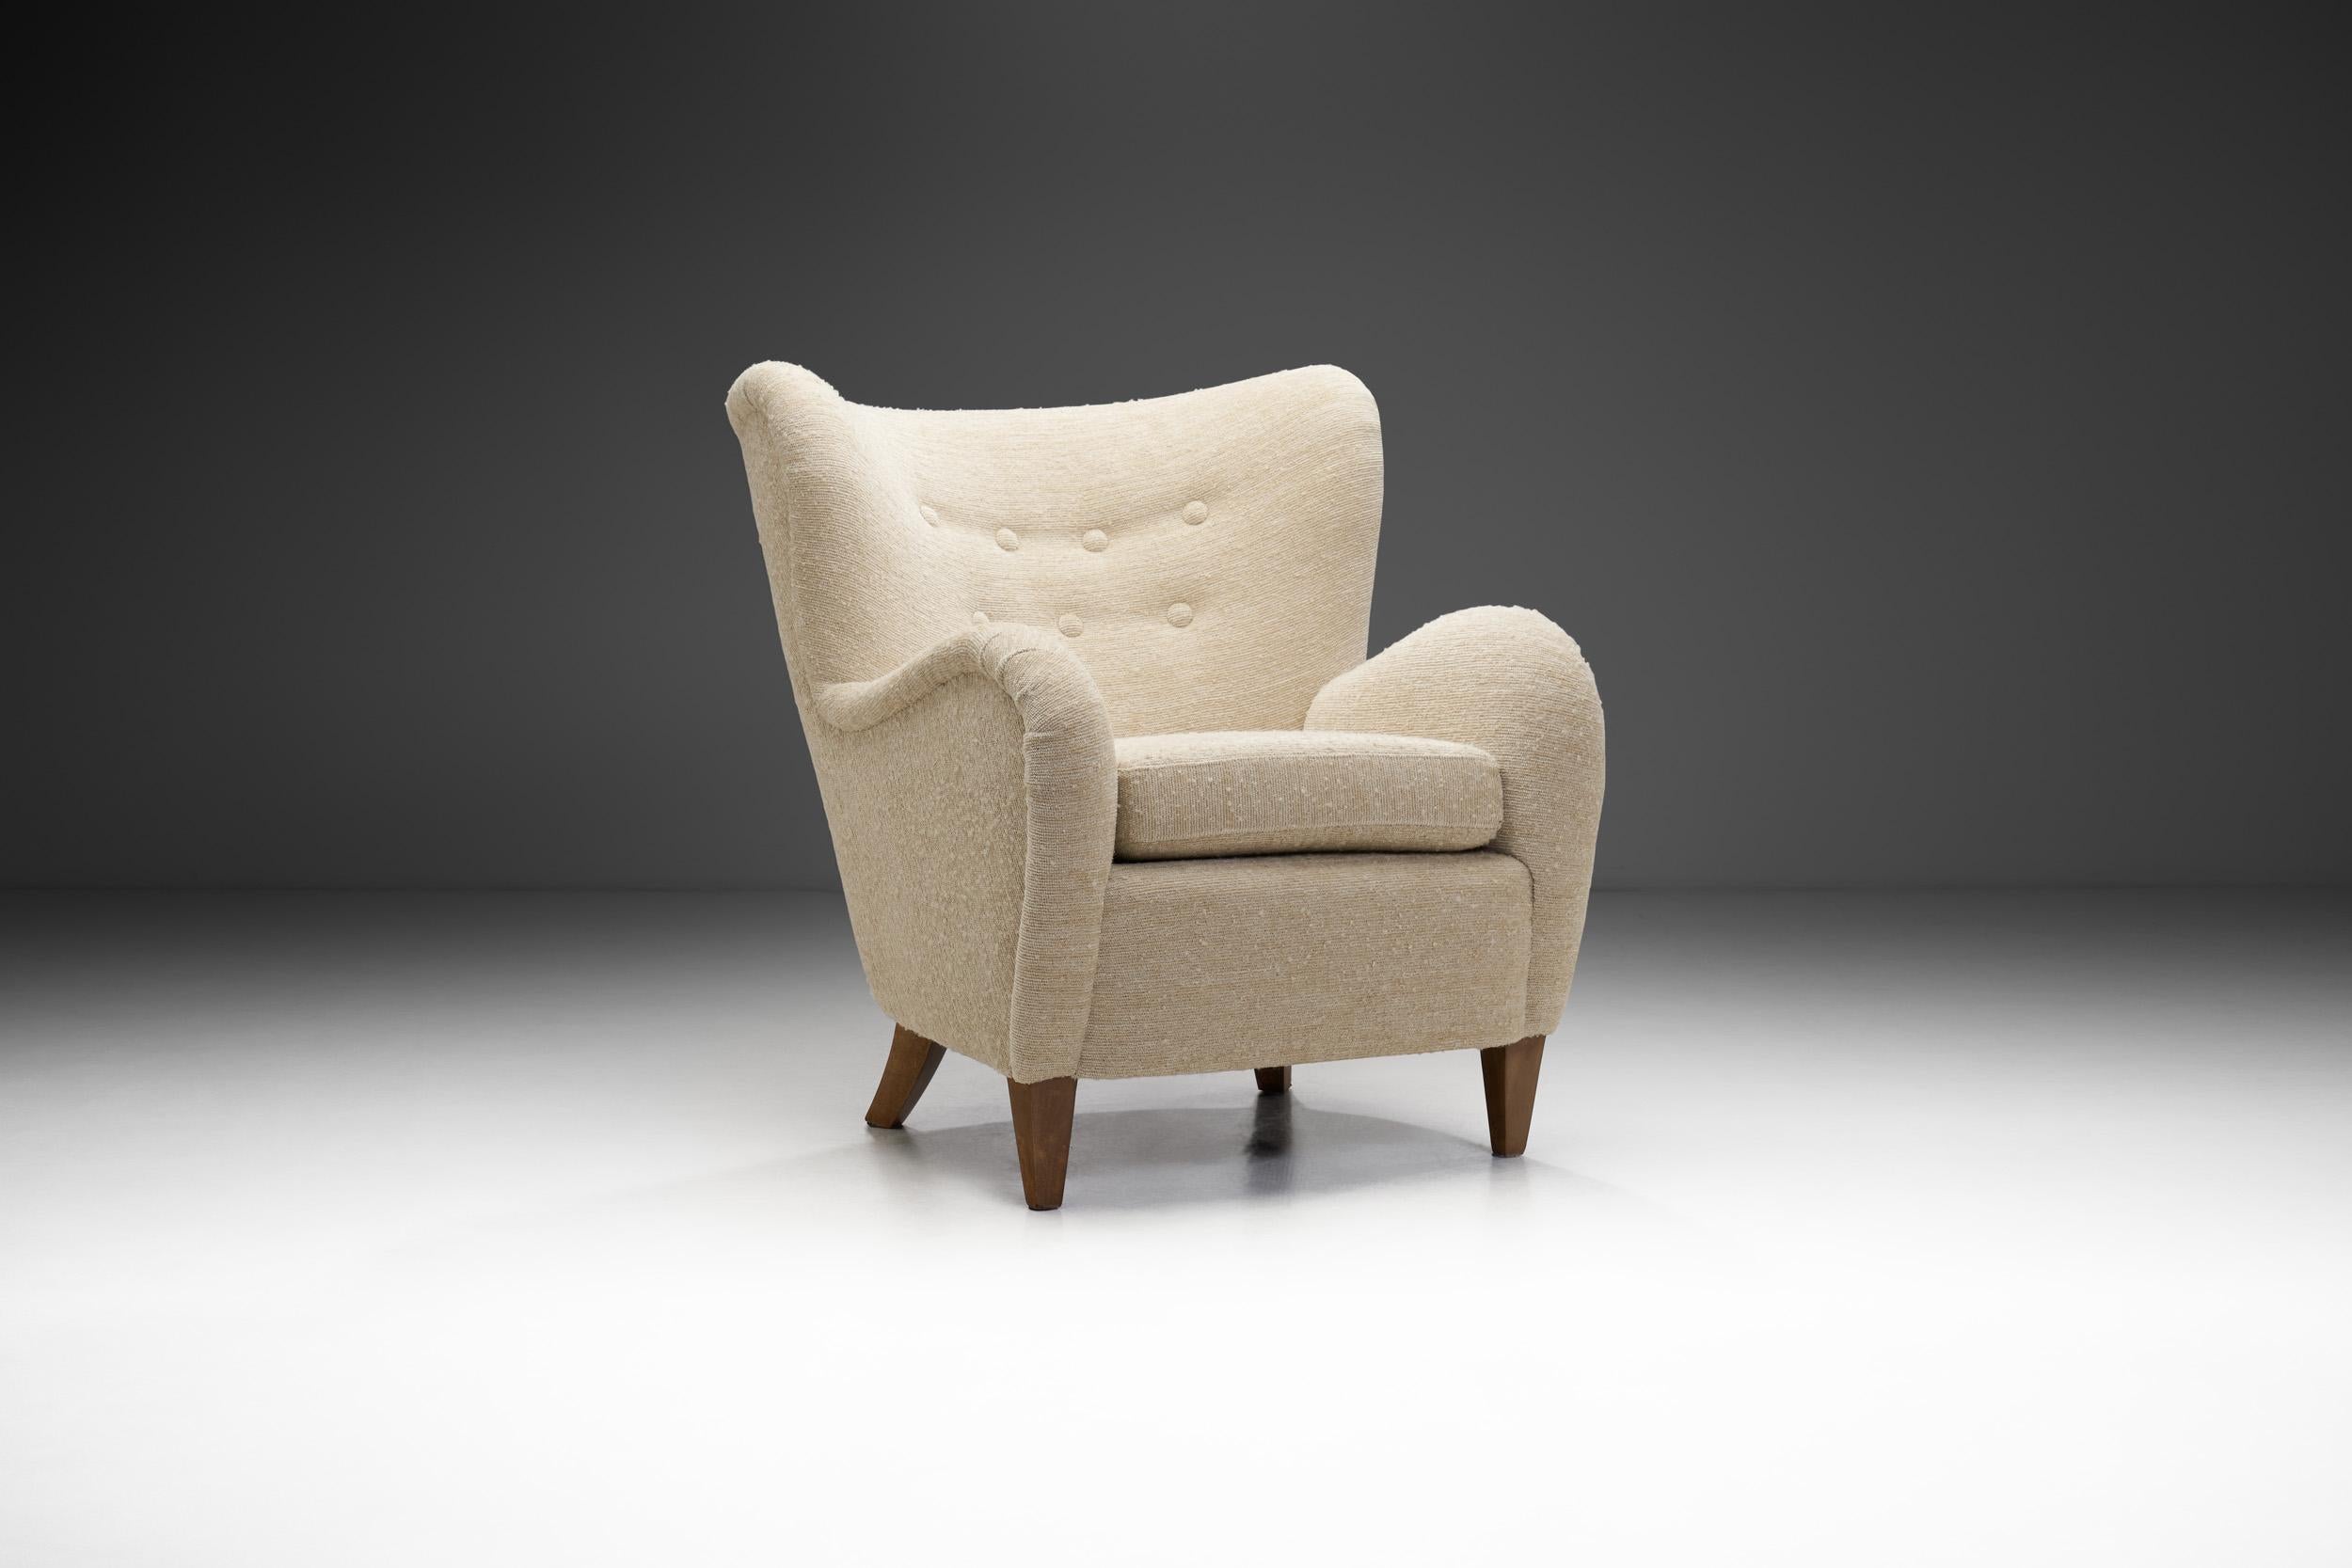 Throughout the Nordic countries, there's a long history of pride in the craftsmanship of using natural materials like wood. This beautiful armchair is a great representation of the quality and craftsmanship of the Nordic tradition, and Finnish